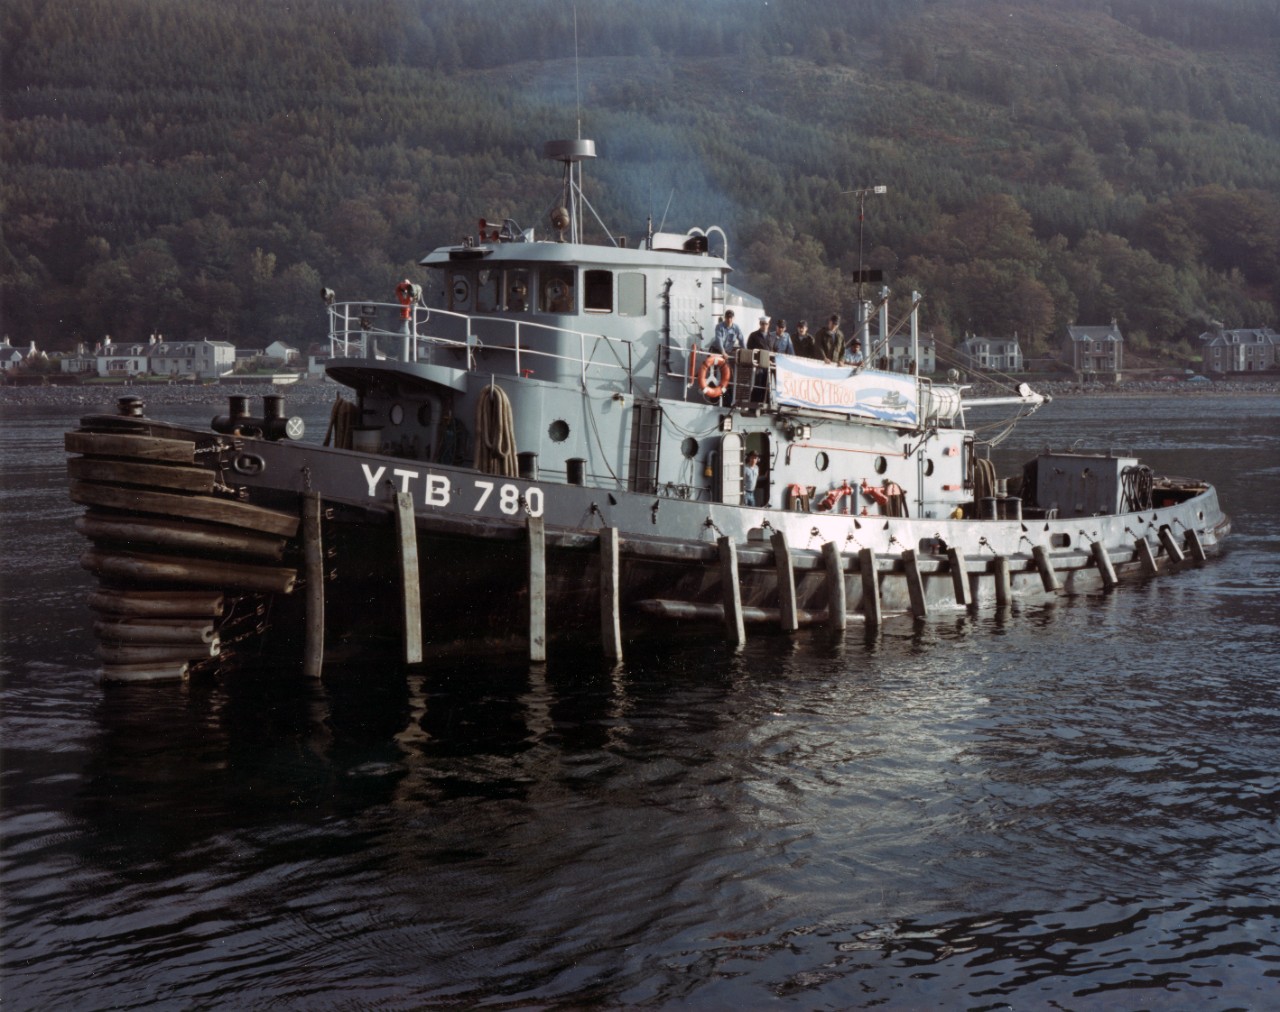 Natick-class large harbor tug Saugus (YTB-780) at Holy Loch, Scotland, circa early 1990s. Note that the tug's crew is assembled on deck.